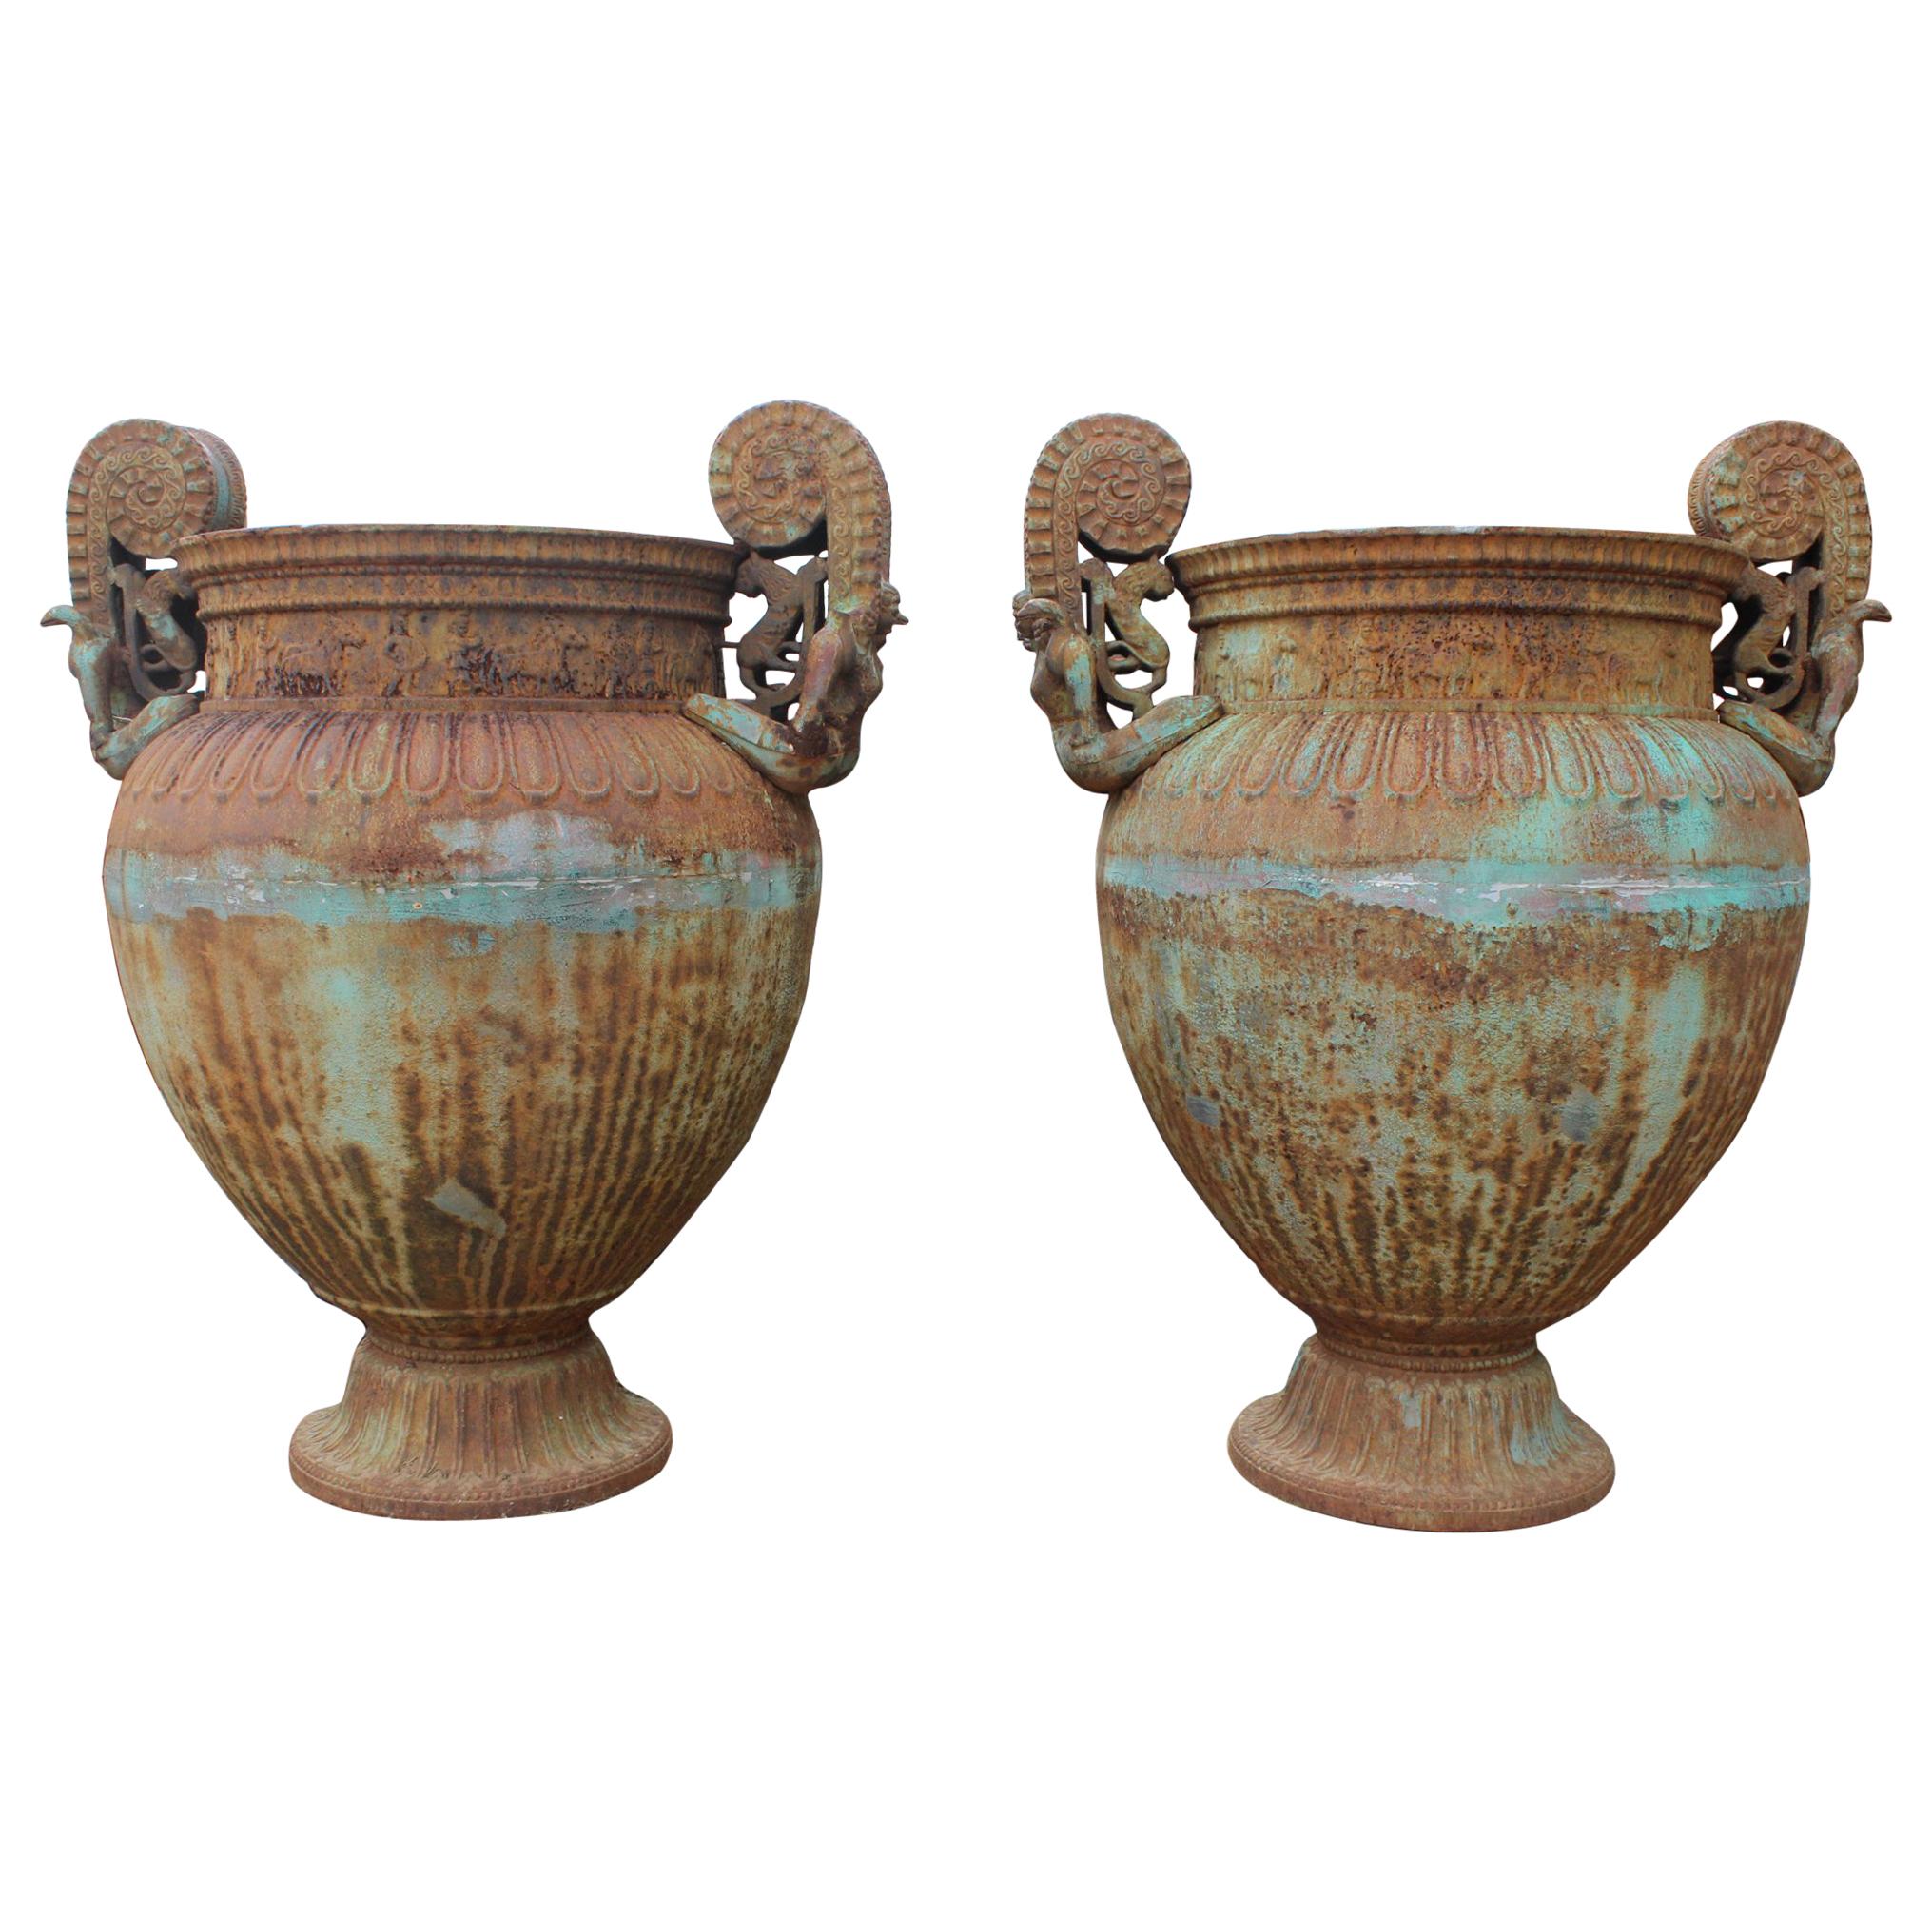 Pair of Italian Cast Iron Urns with Women and Lions Handles